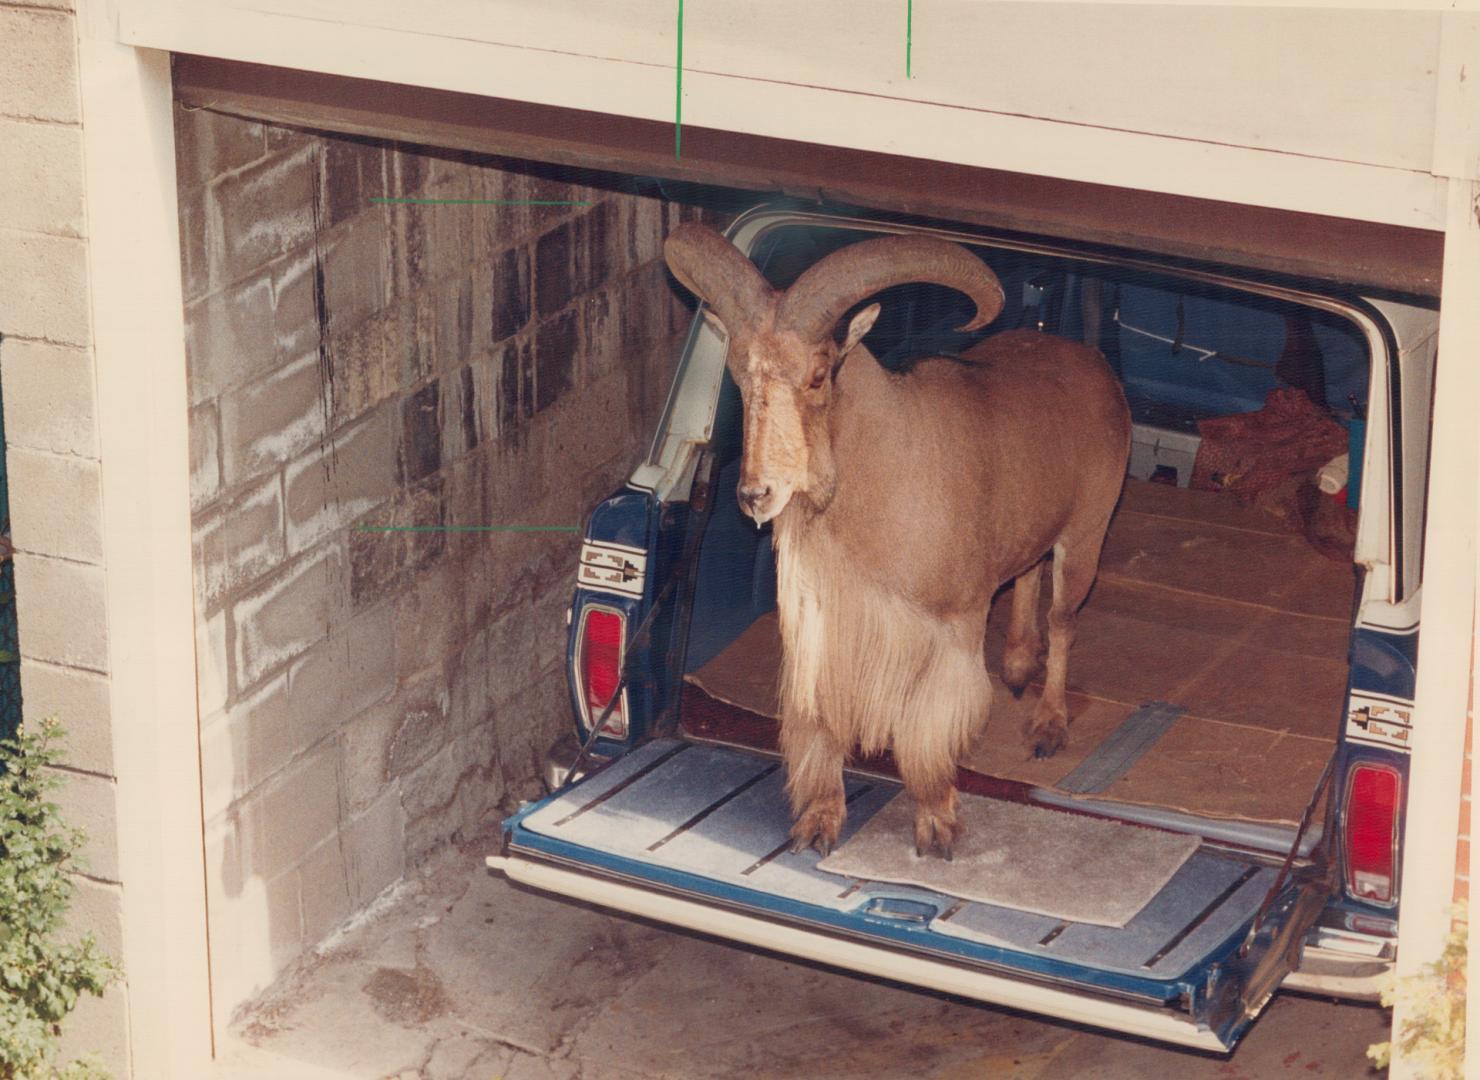 Ram killed: Metro zoo says it probably would have taken Tommy if he was healthy